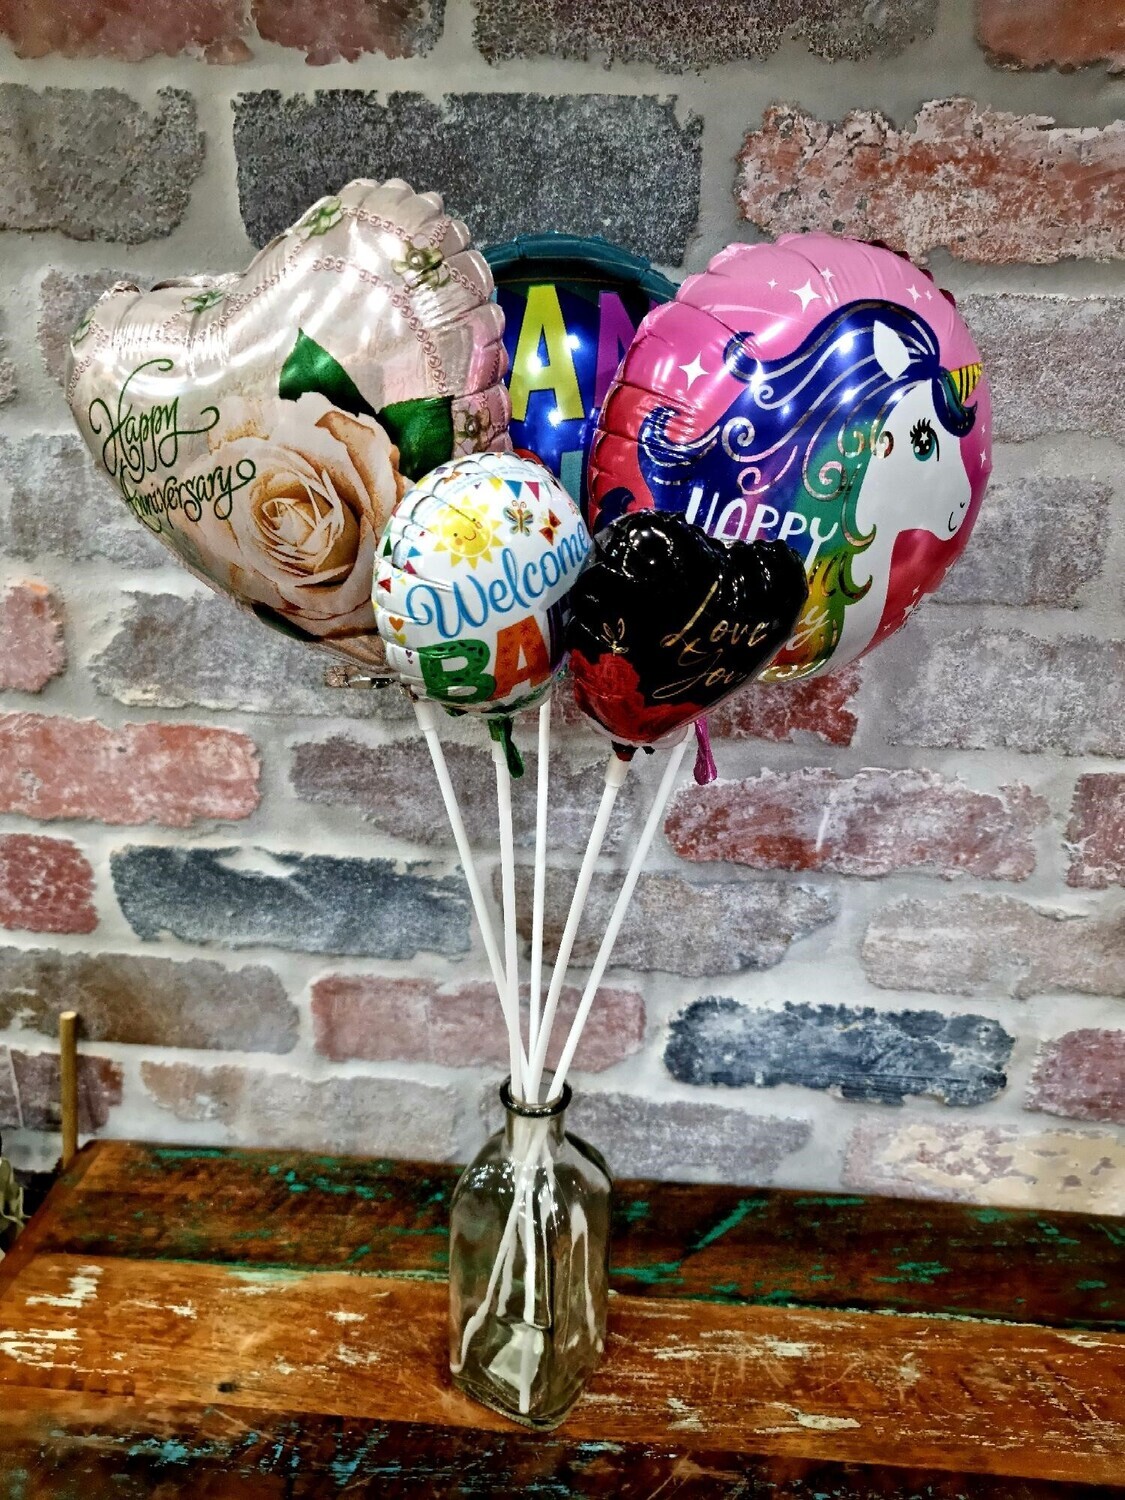 Larger air balloons on stick